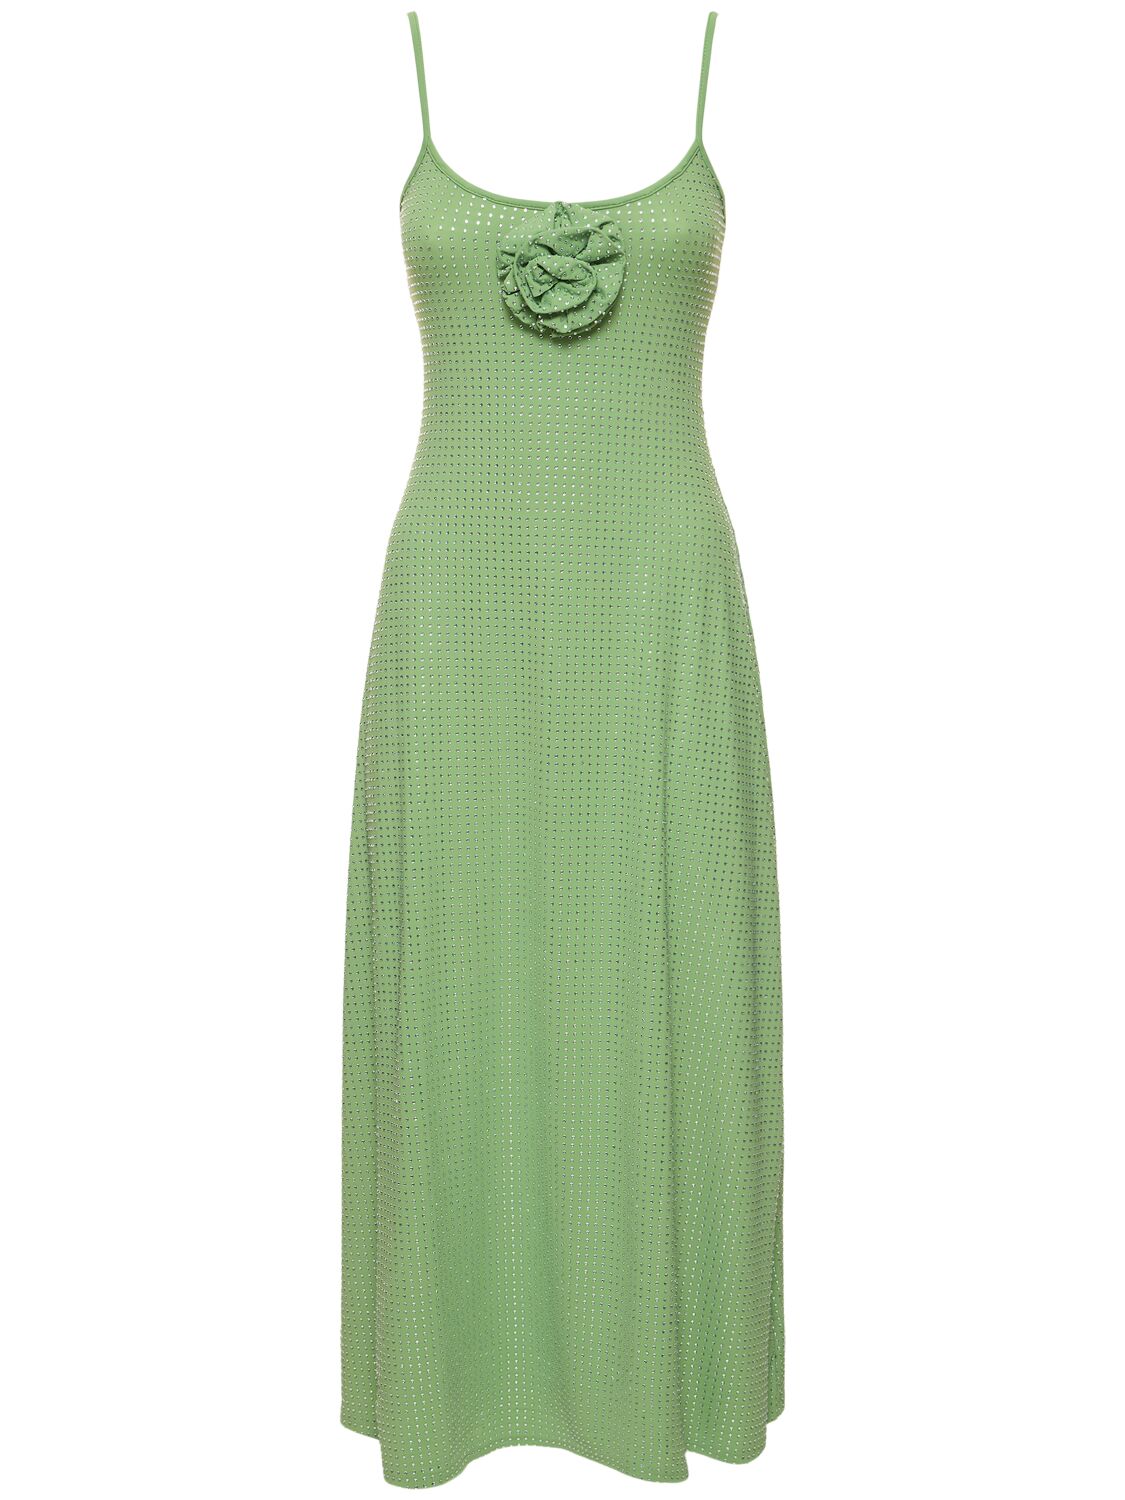 Weworewhat Embellished Midi Dress W/ Rose In Green